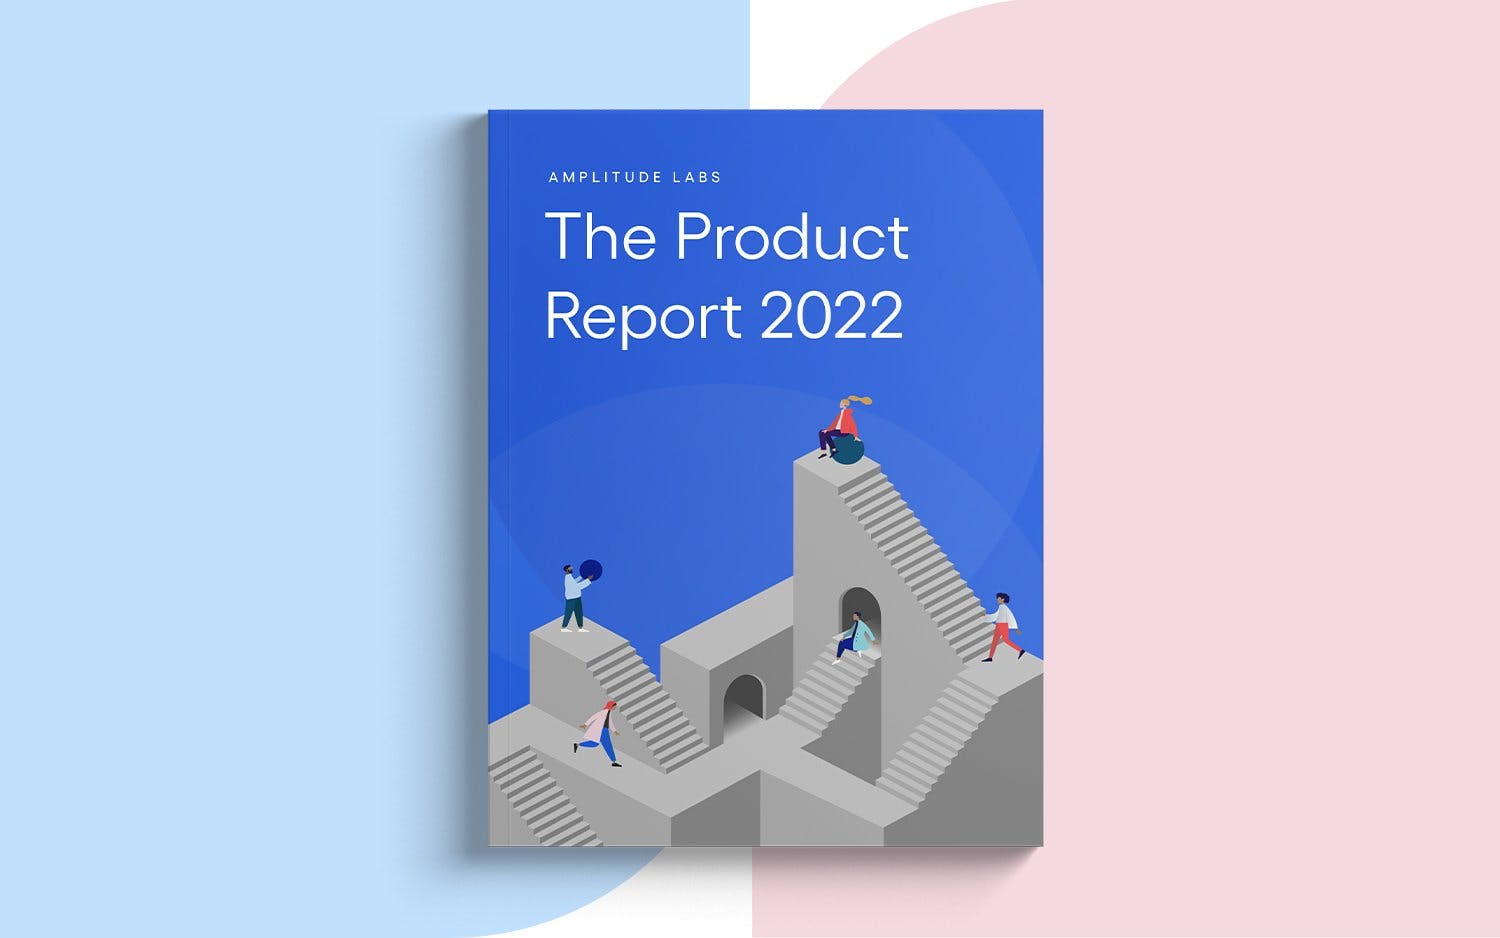 The Product Report 2022